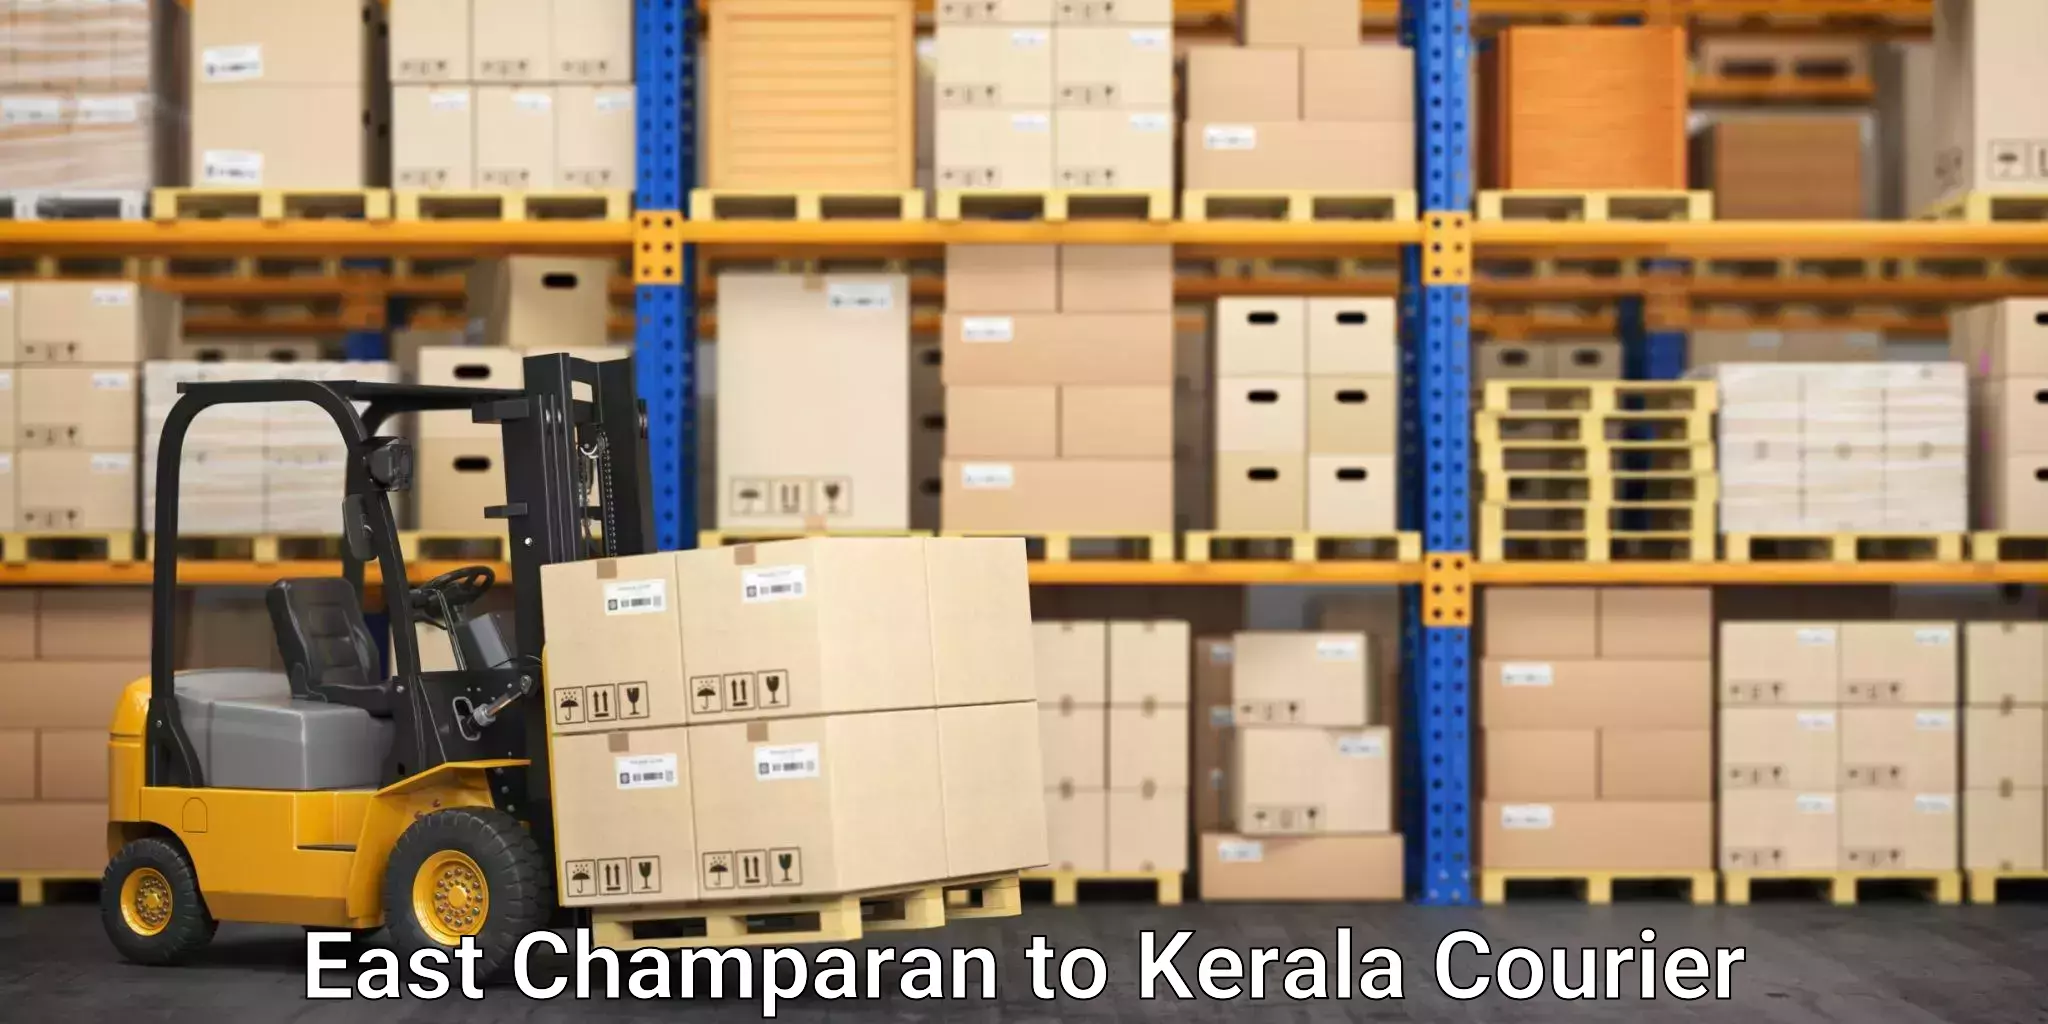 Furniture transport solutions in East Champaran to Rajamudy